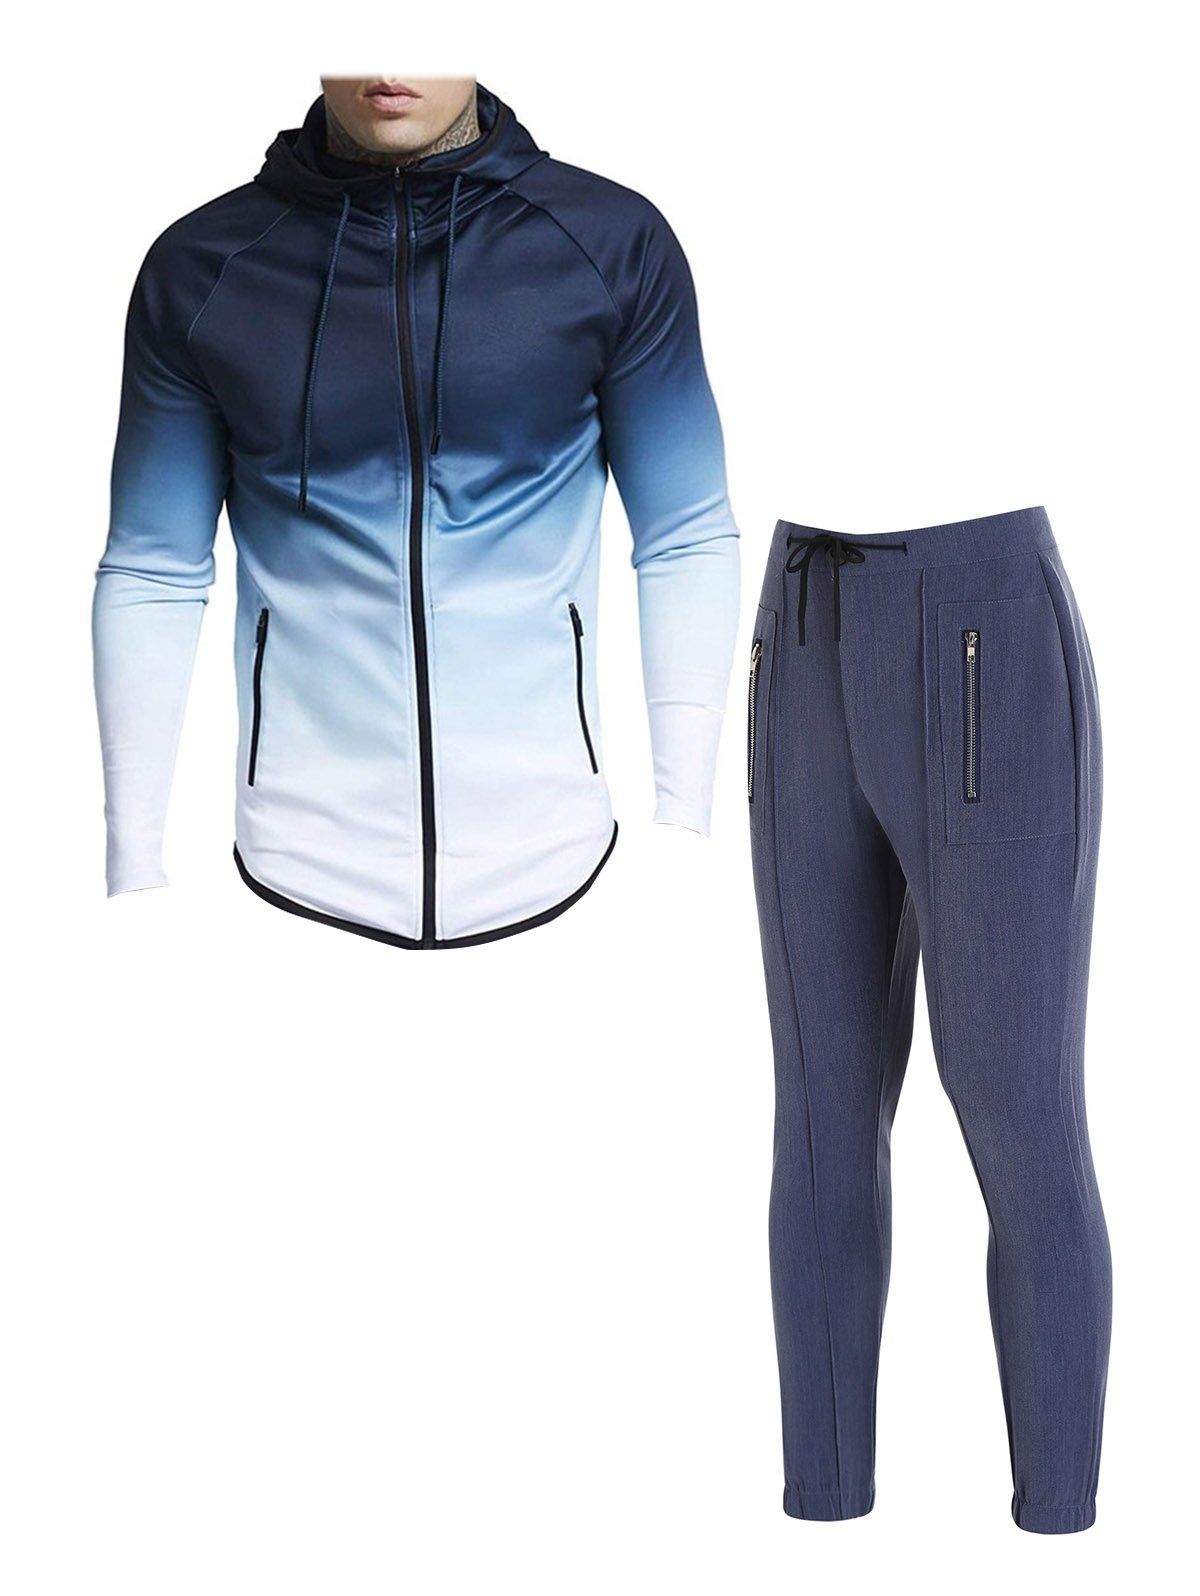 Ombre Raglan Sleeve Zip Up Sport Hooded Jacket And Drawstring Waist Zip Fly Beam Feet Pants Outfit - BLUE M